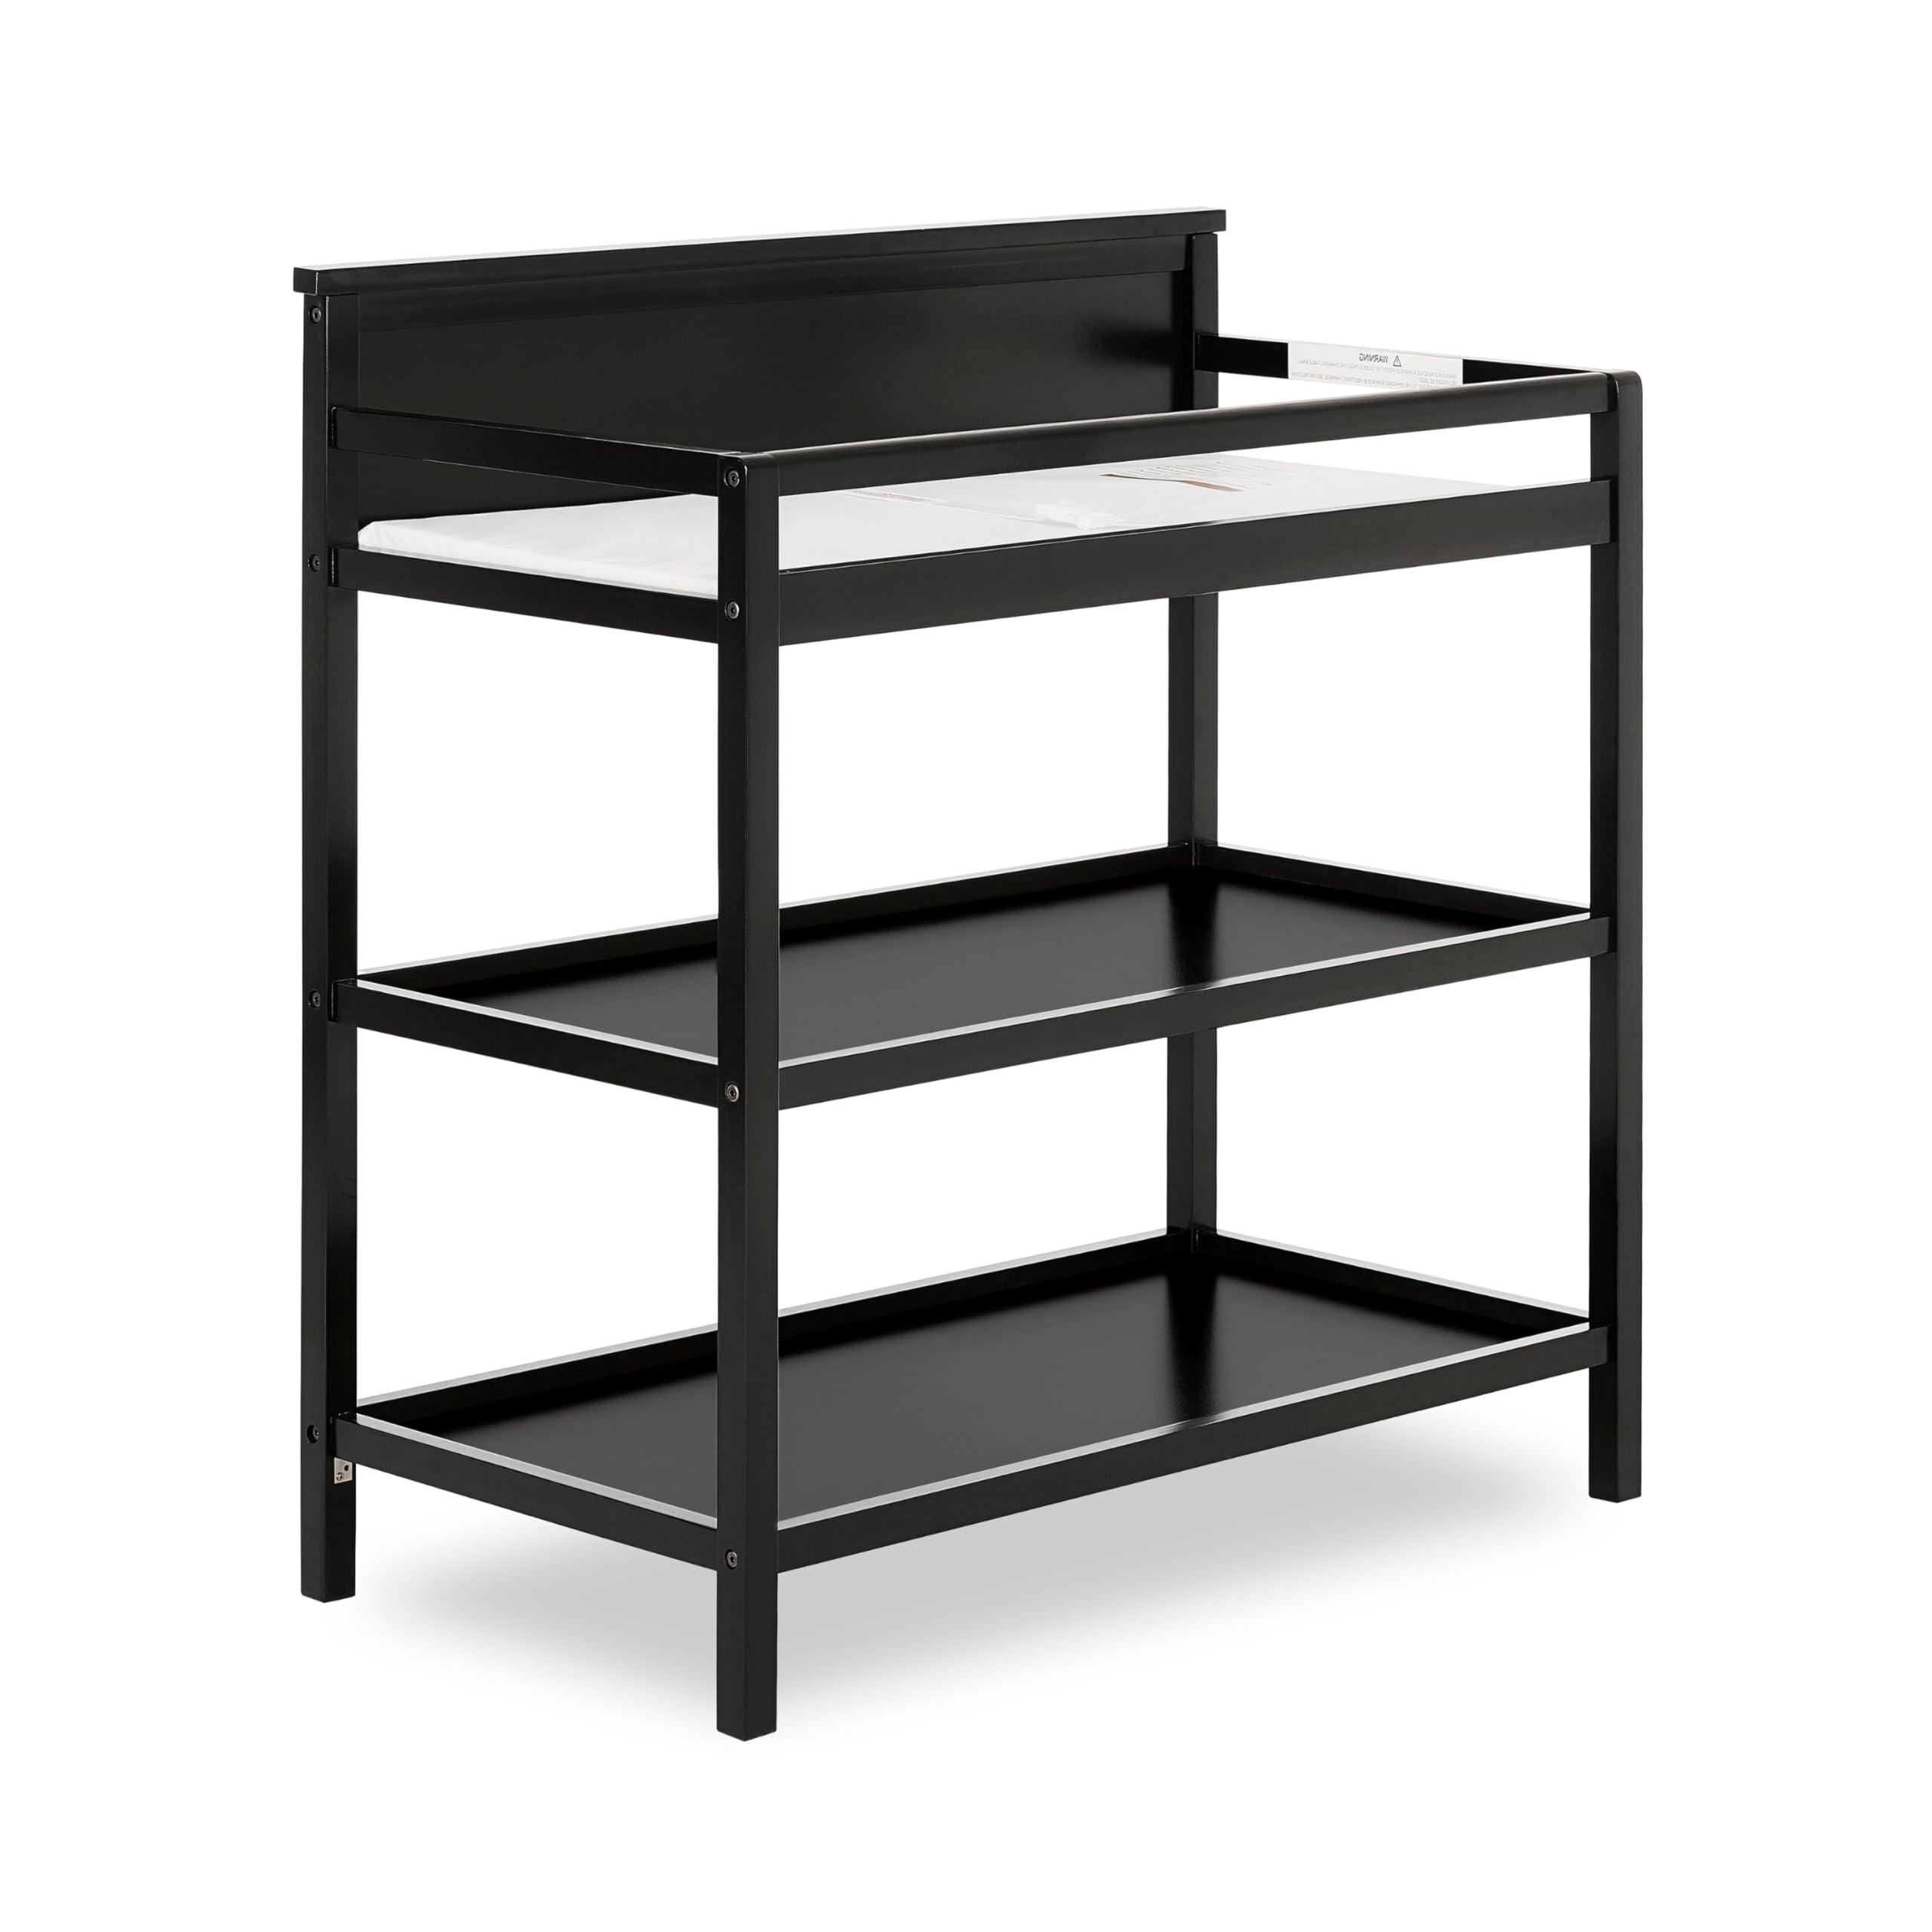 Dream On Me Jax Universal Changing Table in Matte Black